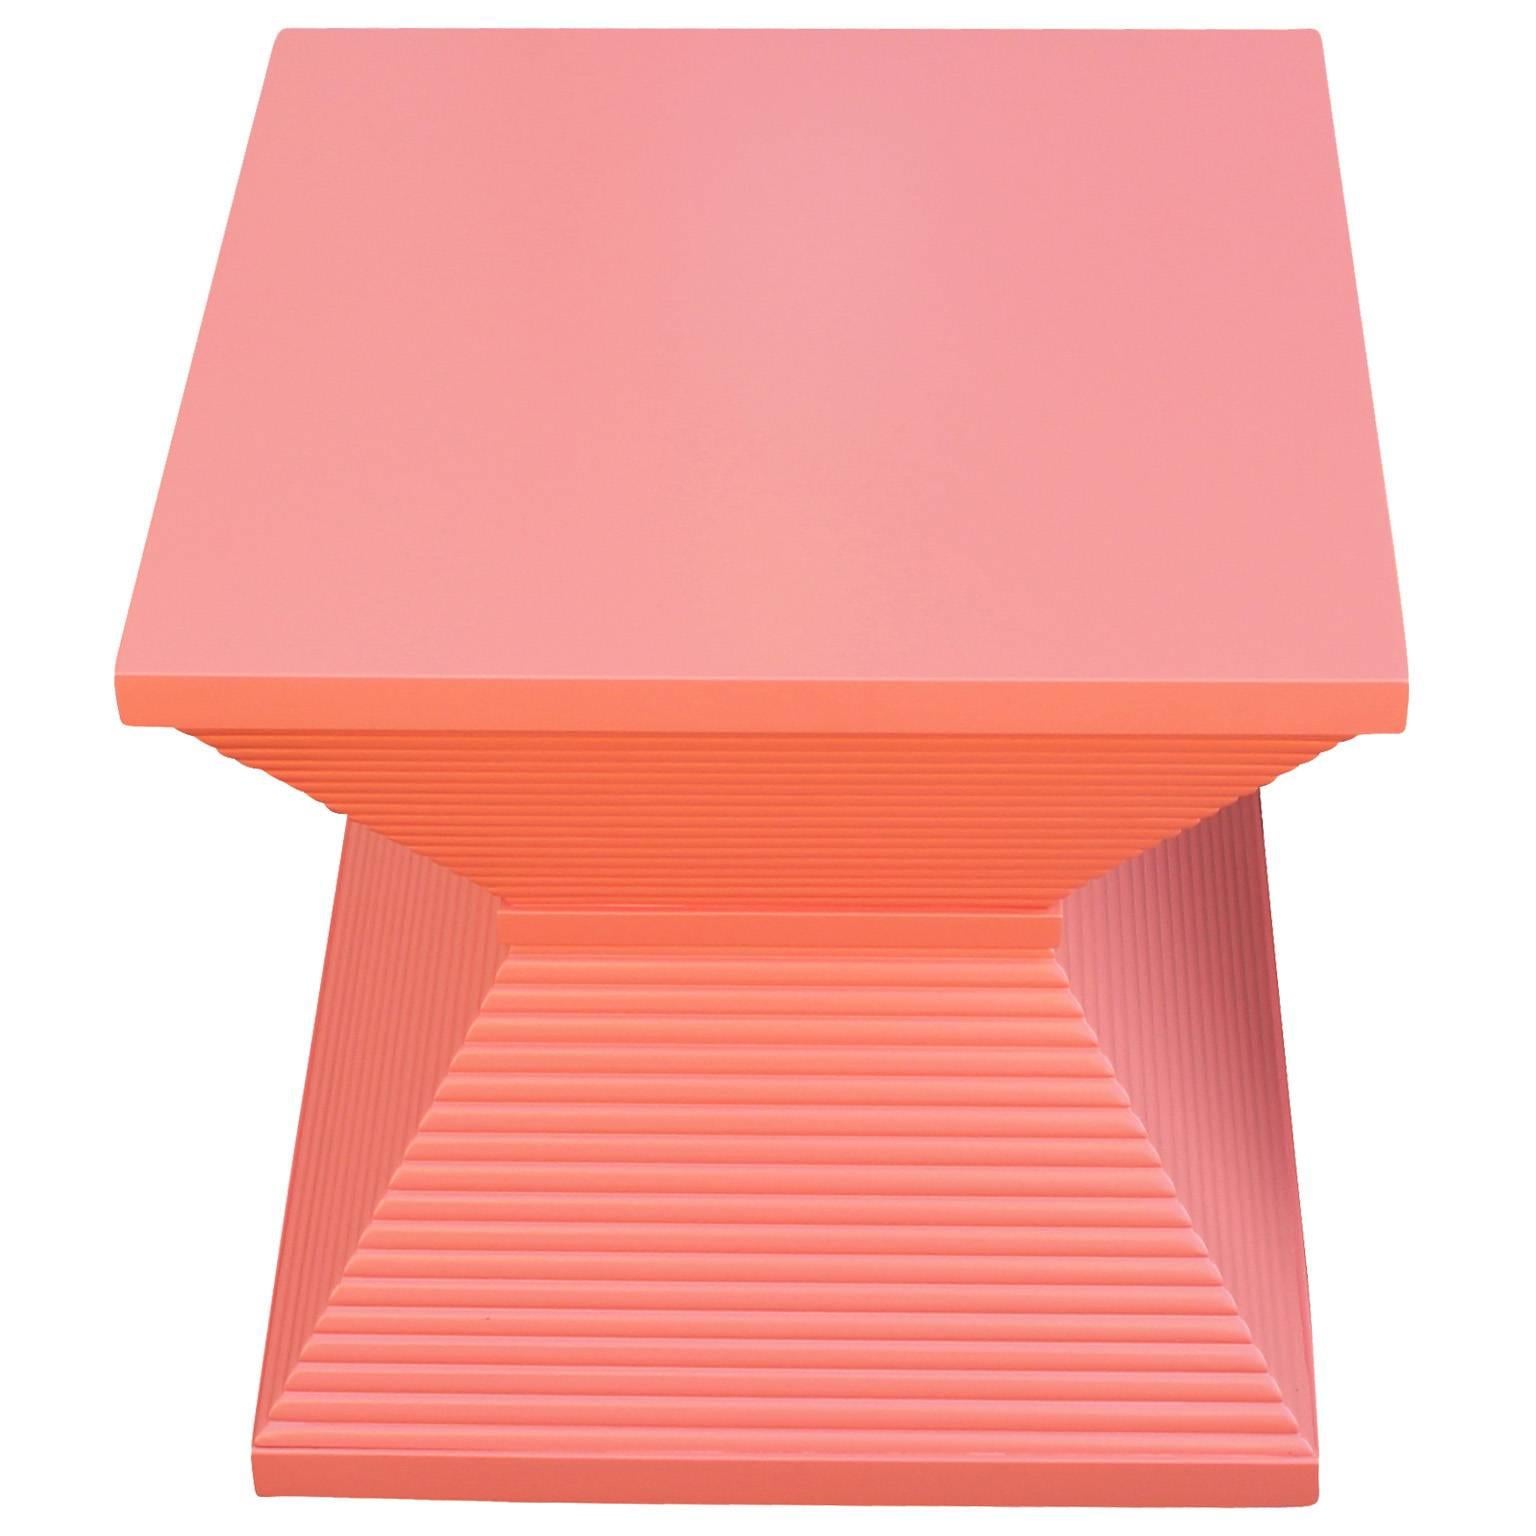 Late 20th Century Modern Sculptural Pair of Coral Lacquered Pyramid Side Tables